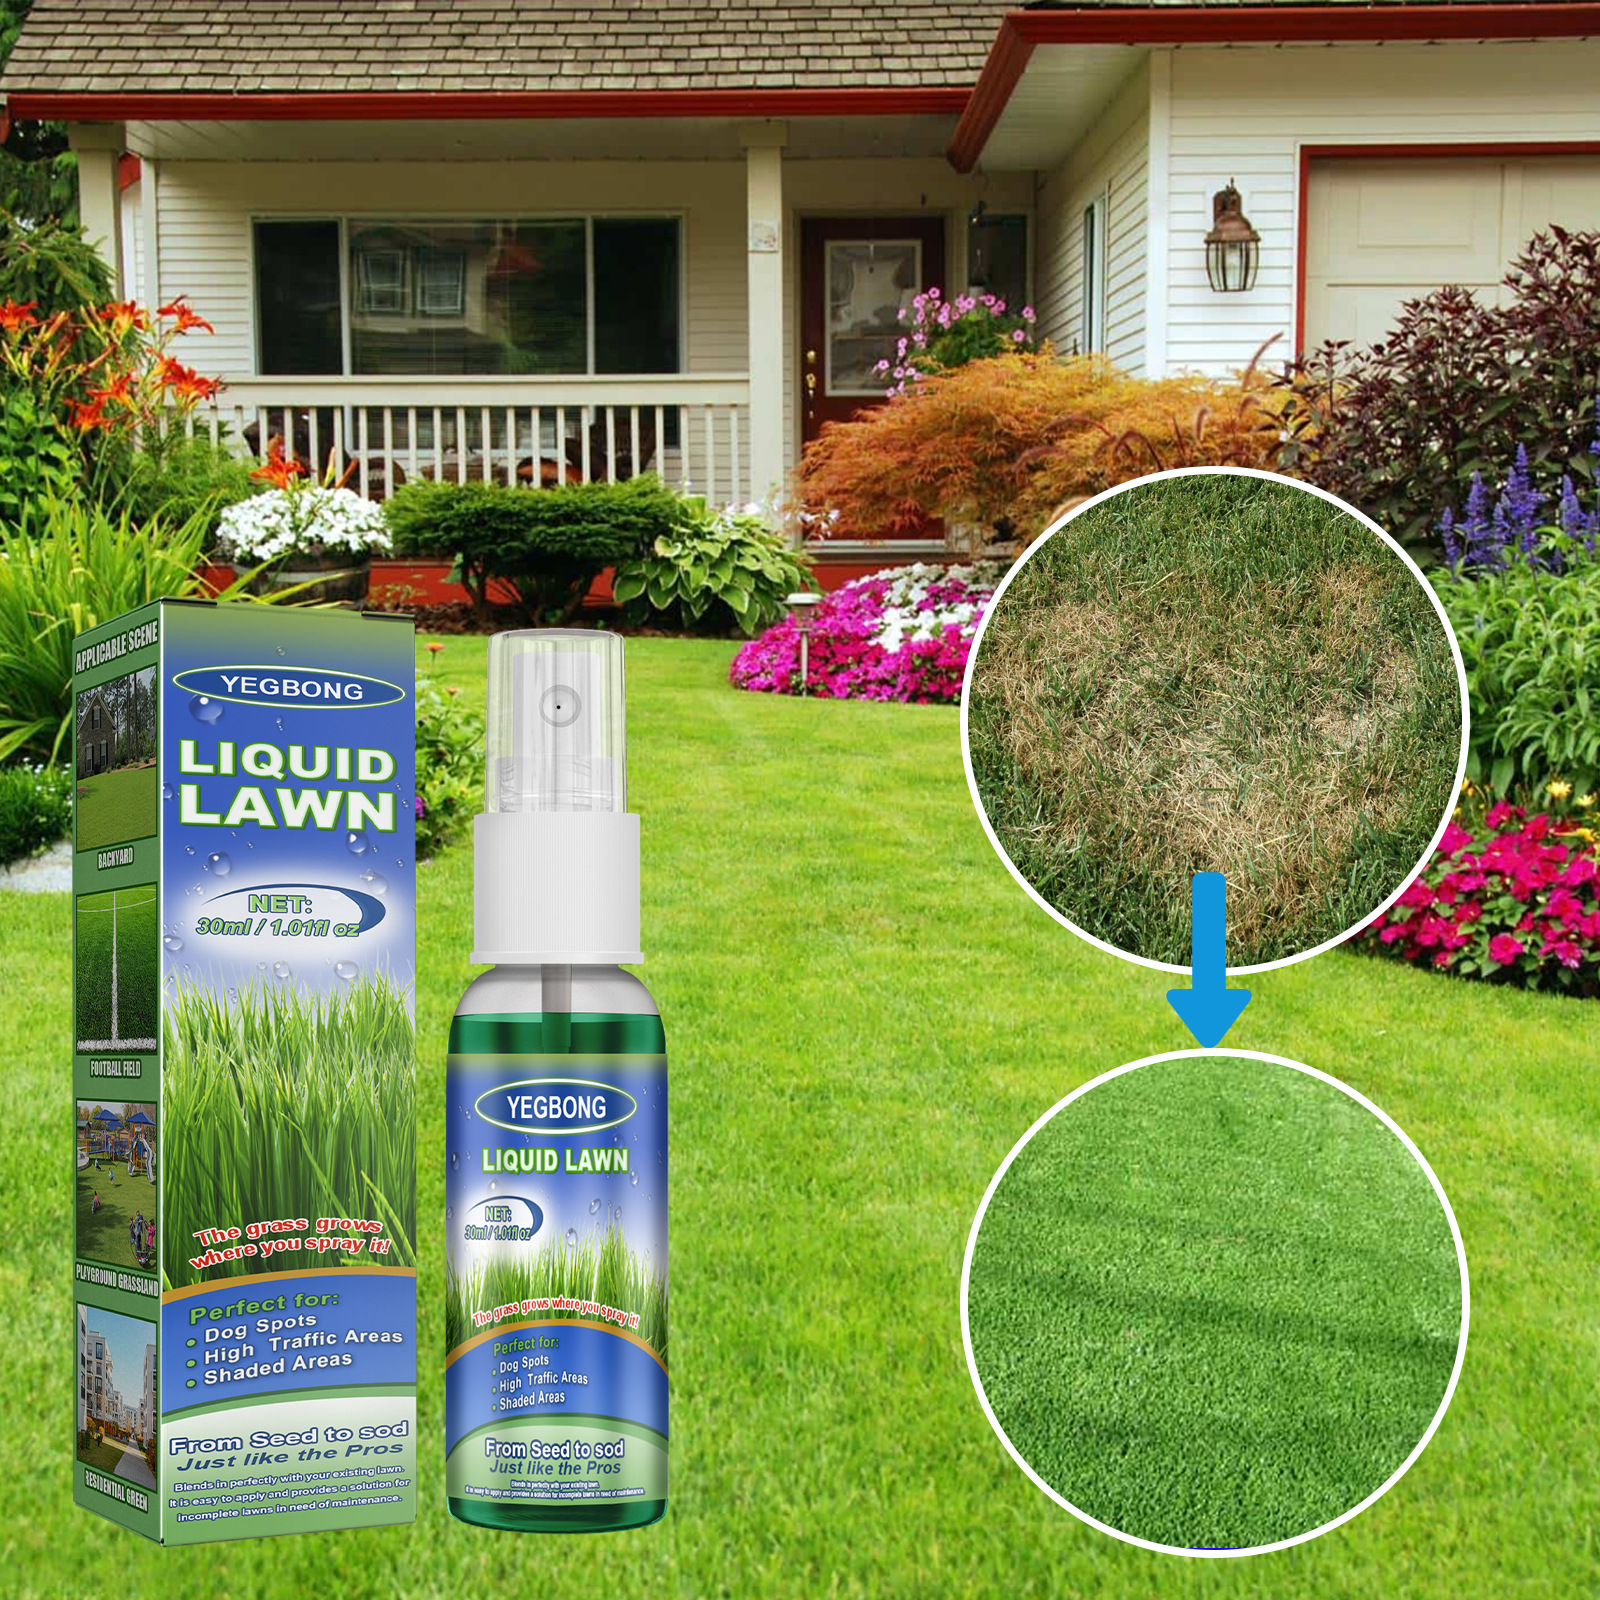 Yegbong Green Lawn Spray Backyard Outdoor Football Field Playground Grass Growth Concentrated Nutrient Solution Spray